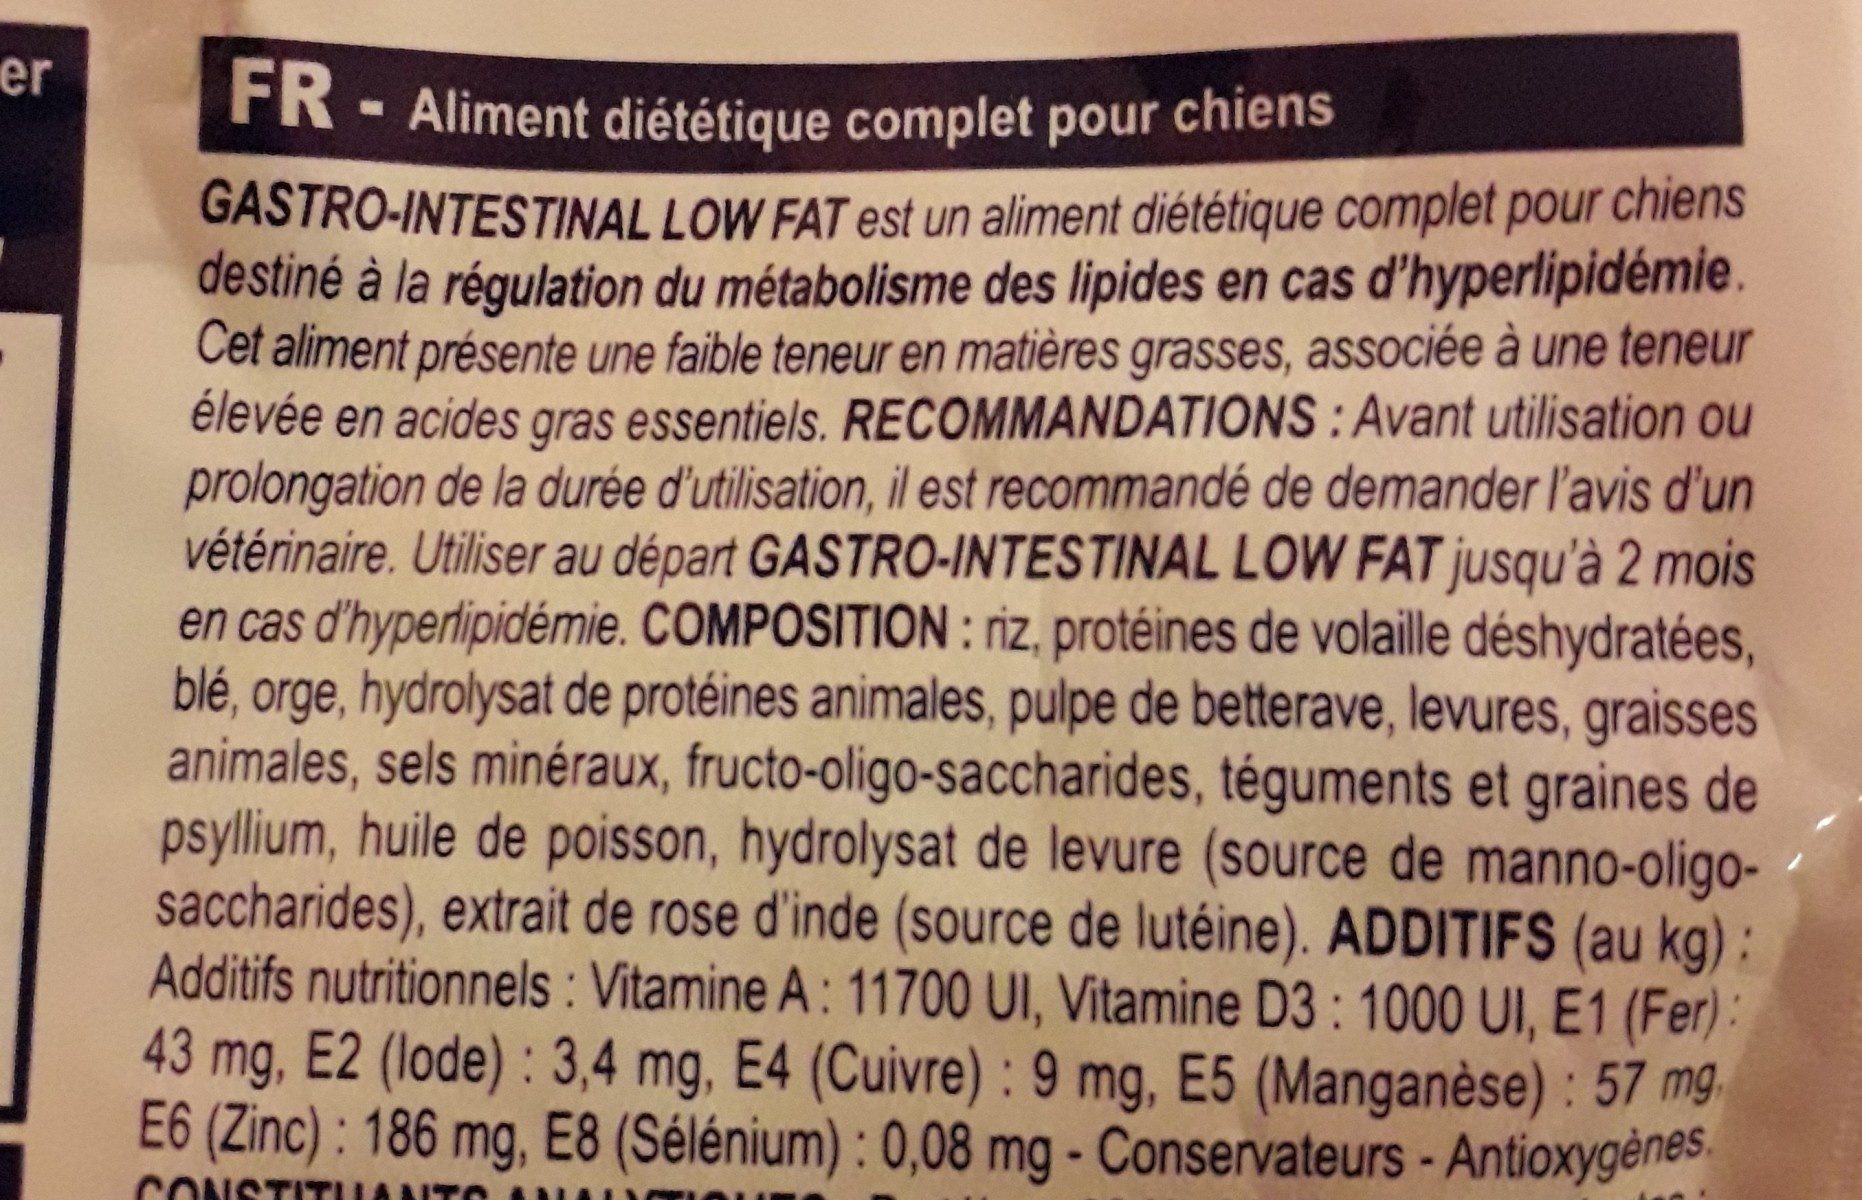 Royal Canin Veterinary - Gastro Intestinal Low Fat Chien LF 22 - Ingrédients - fr